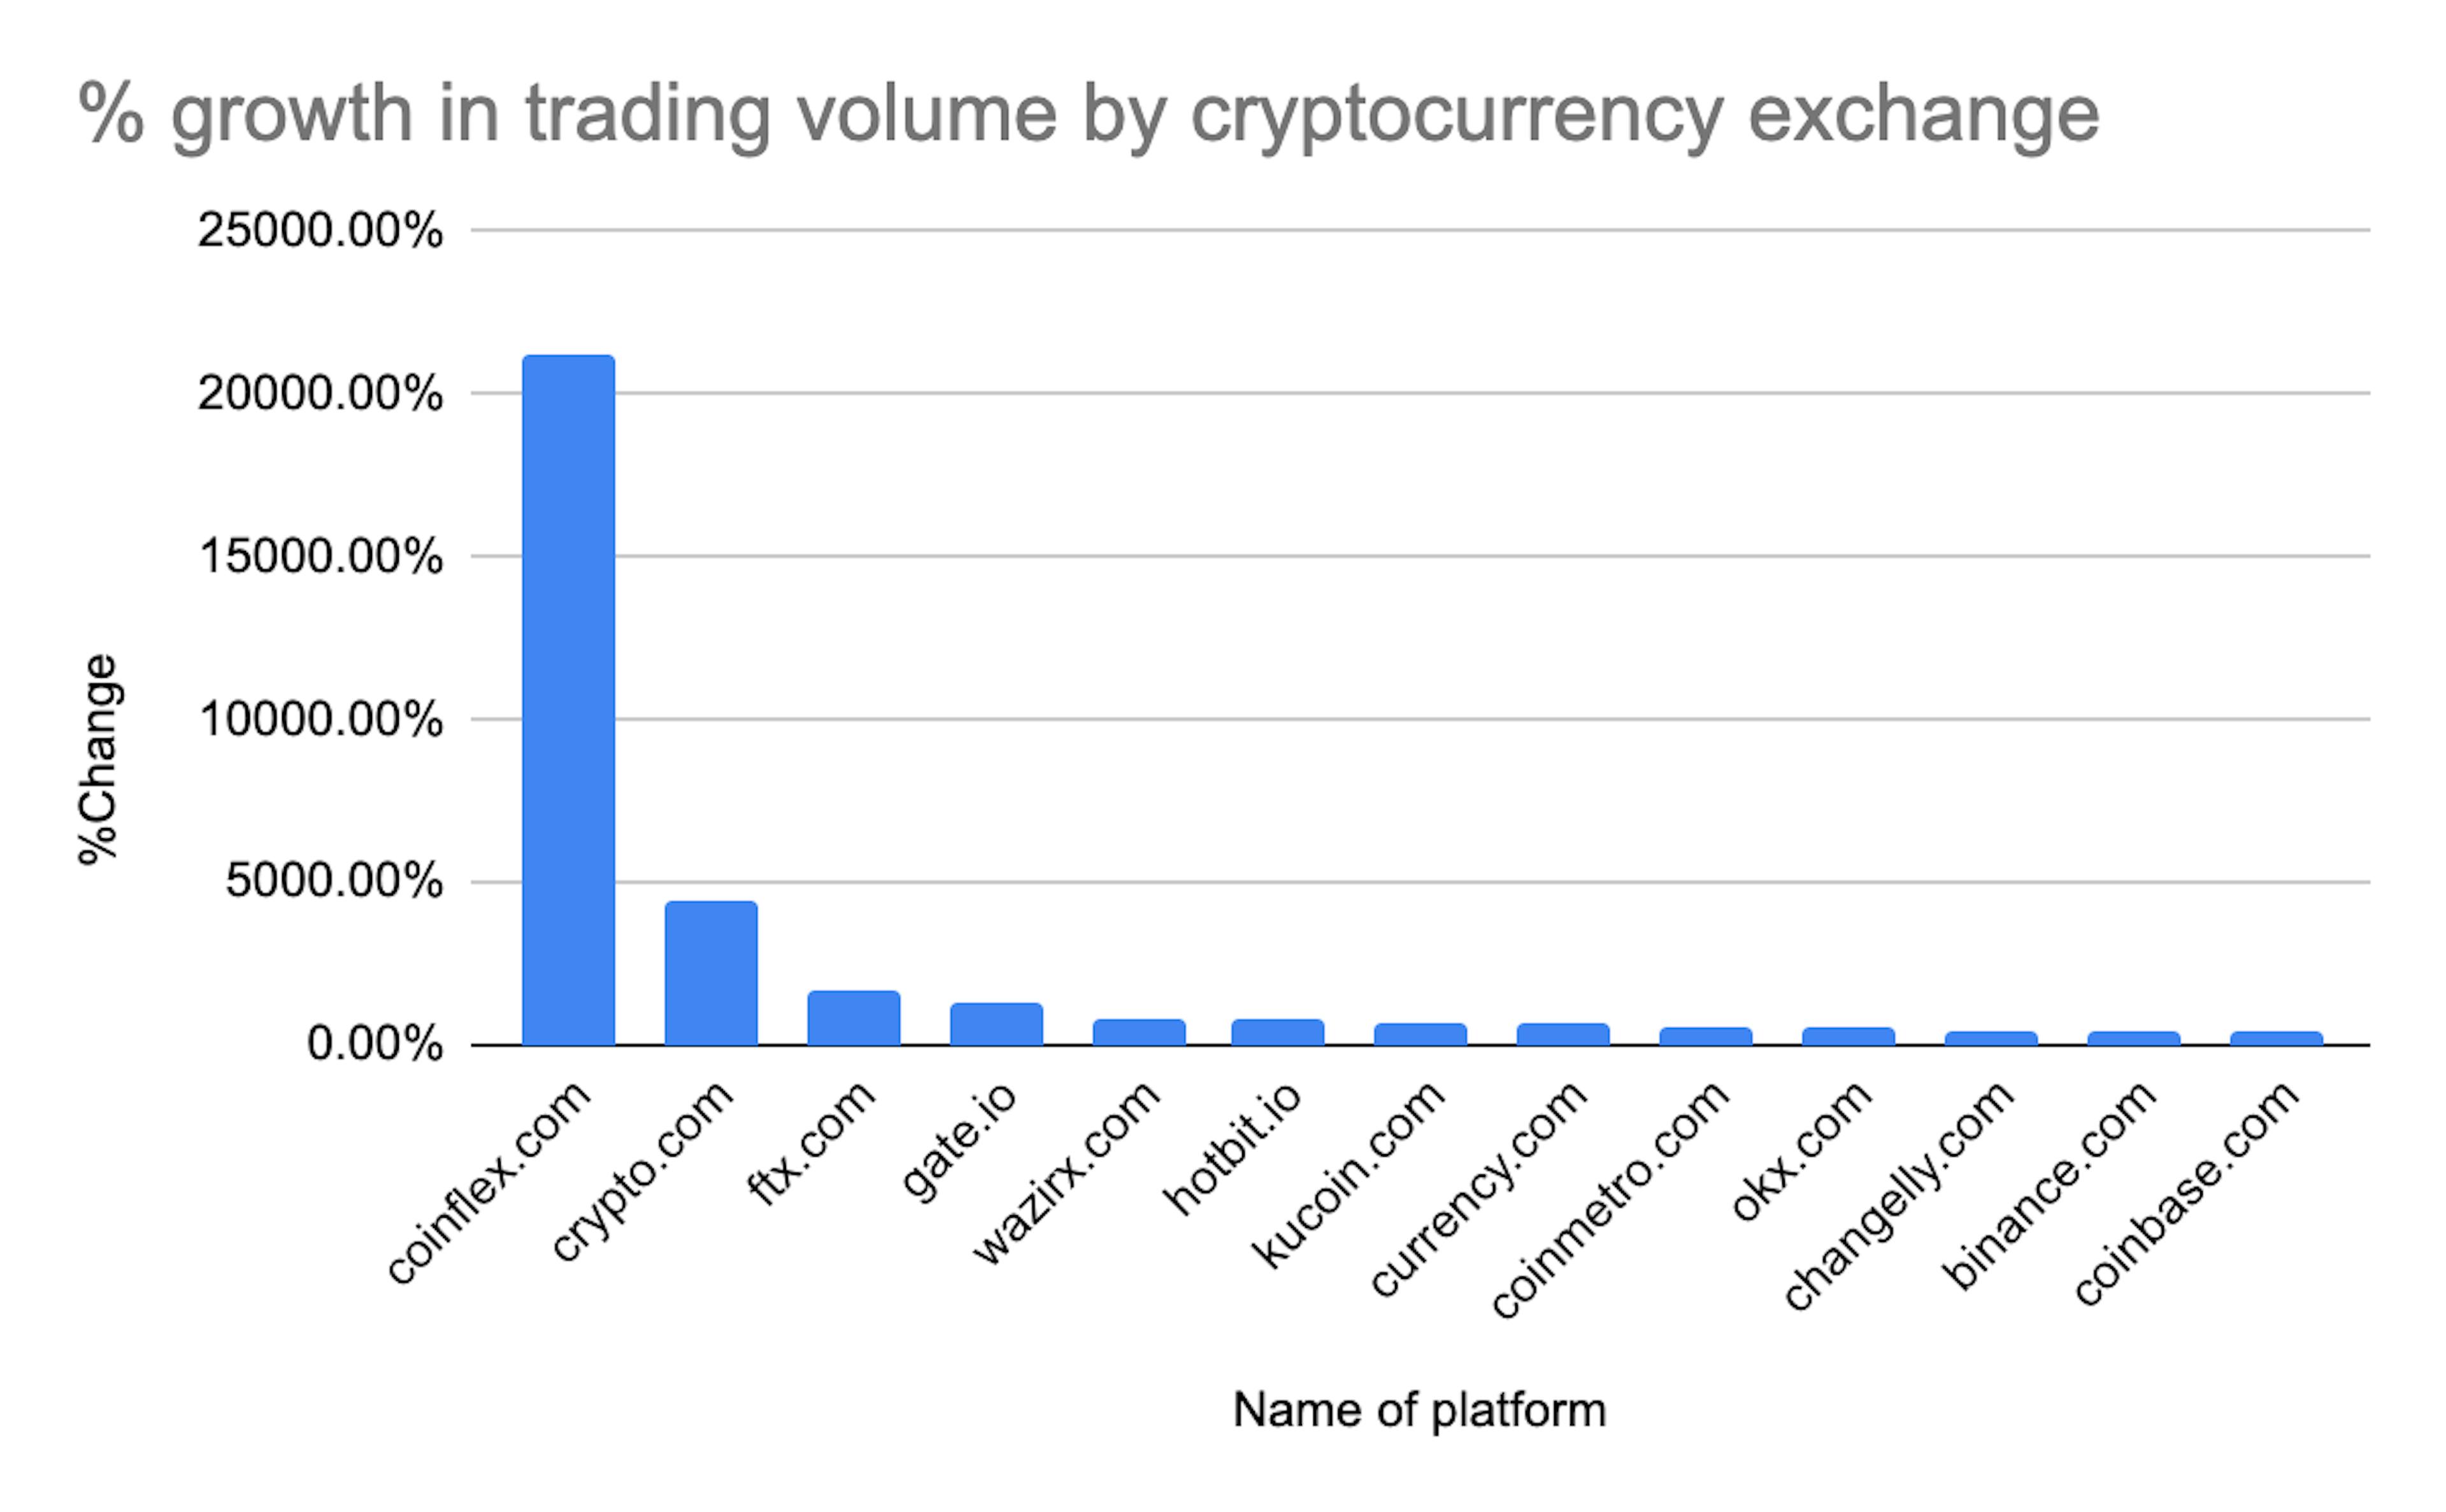 Fastest growing cryptocurrency exchanges